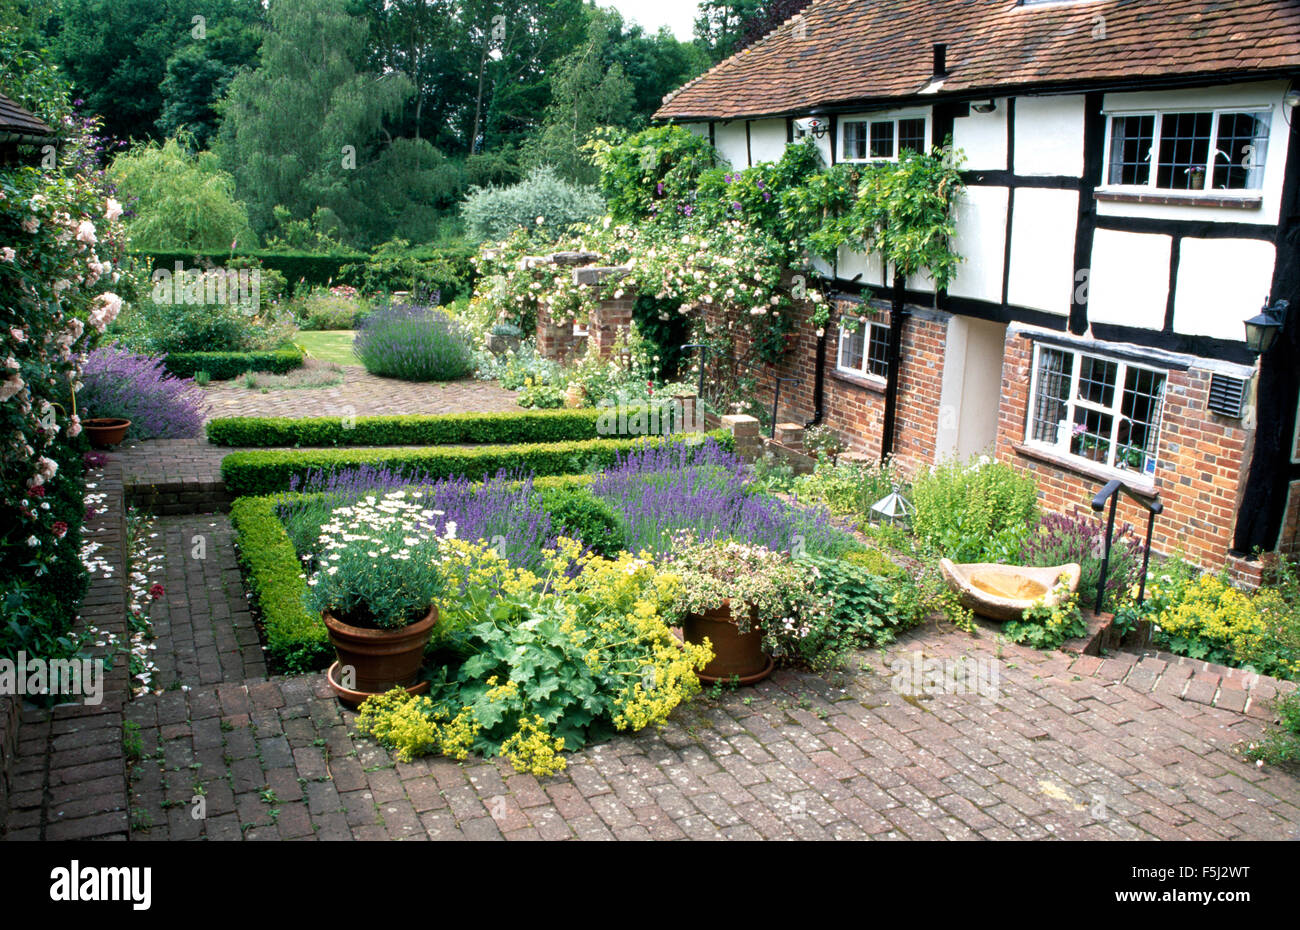 Small formal knot garden with box edging around lavender front of a country cottage with brick paving Stock Photo